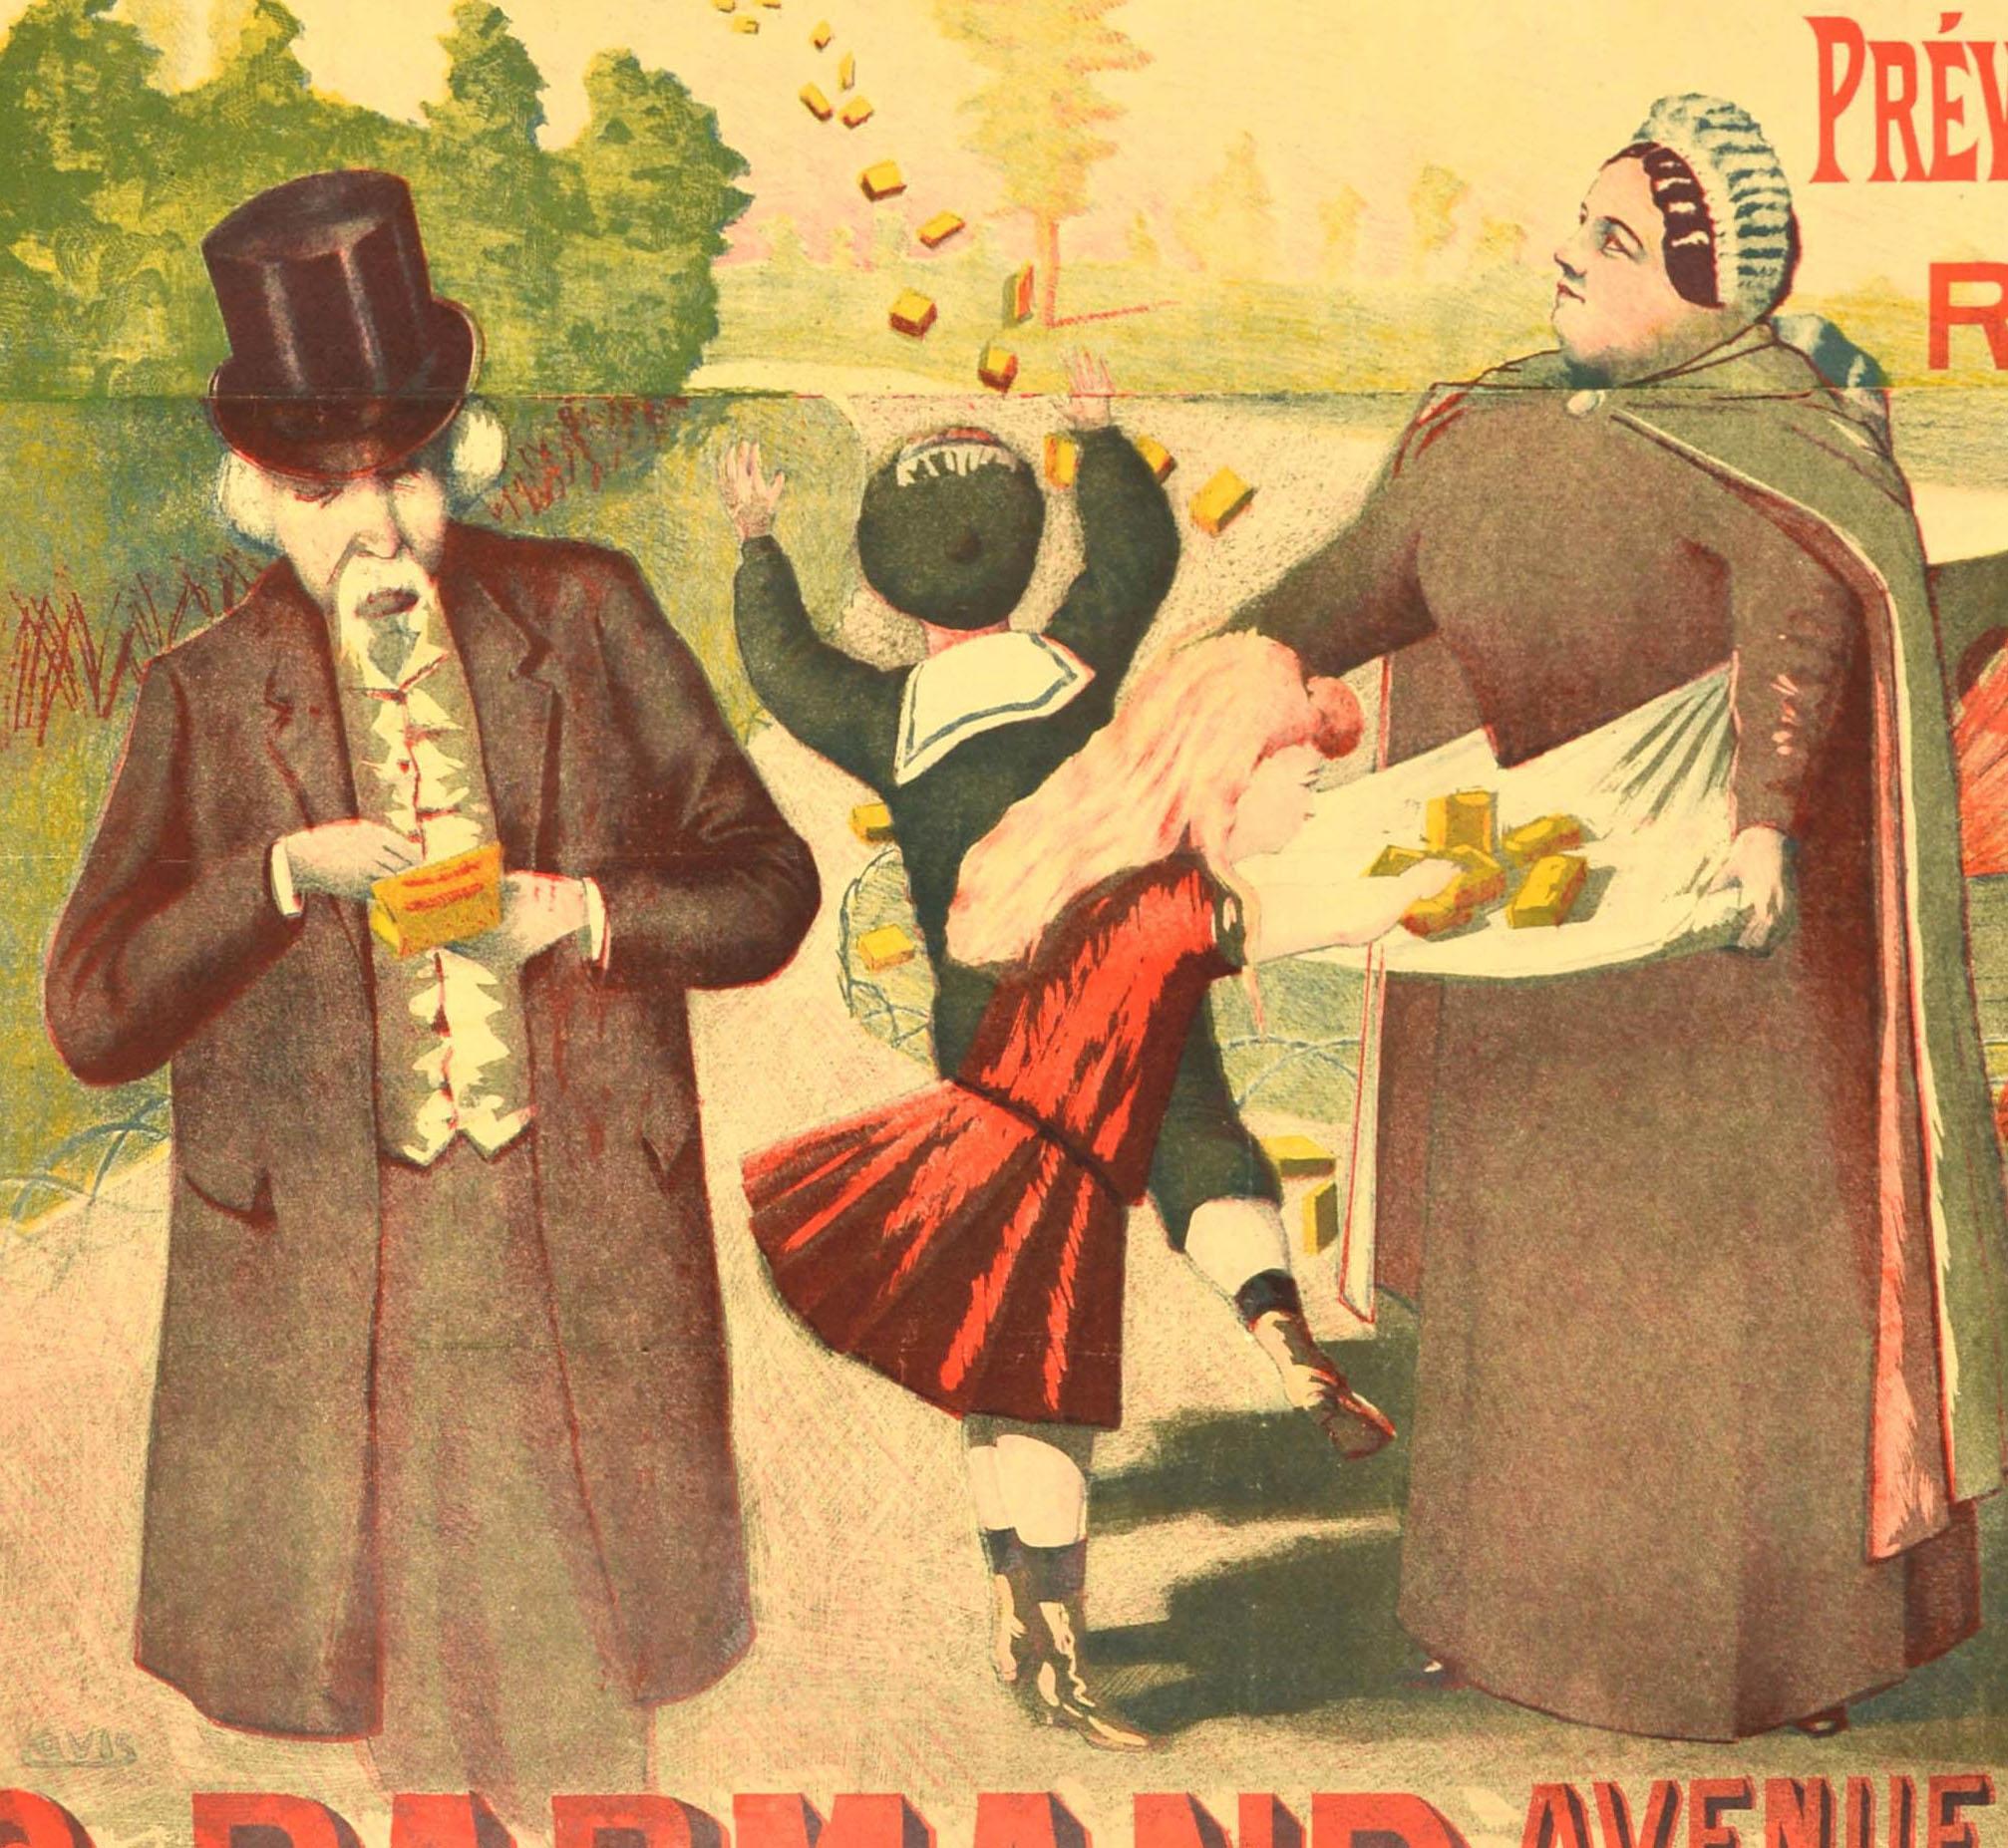 Original antique advertising poster for Pastilles au Miel honey flavour lozenges featuring an illustration of the medicinal sweets falling from a blimp to a park below with children catching them and putting them on a lady's apron, a pram behind her